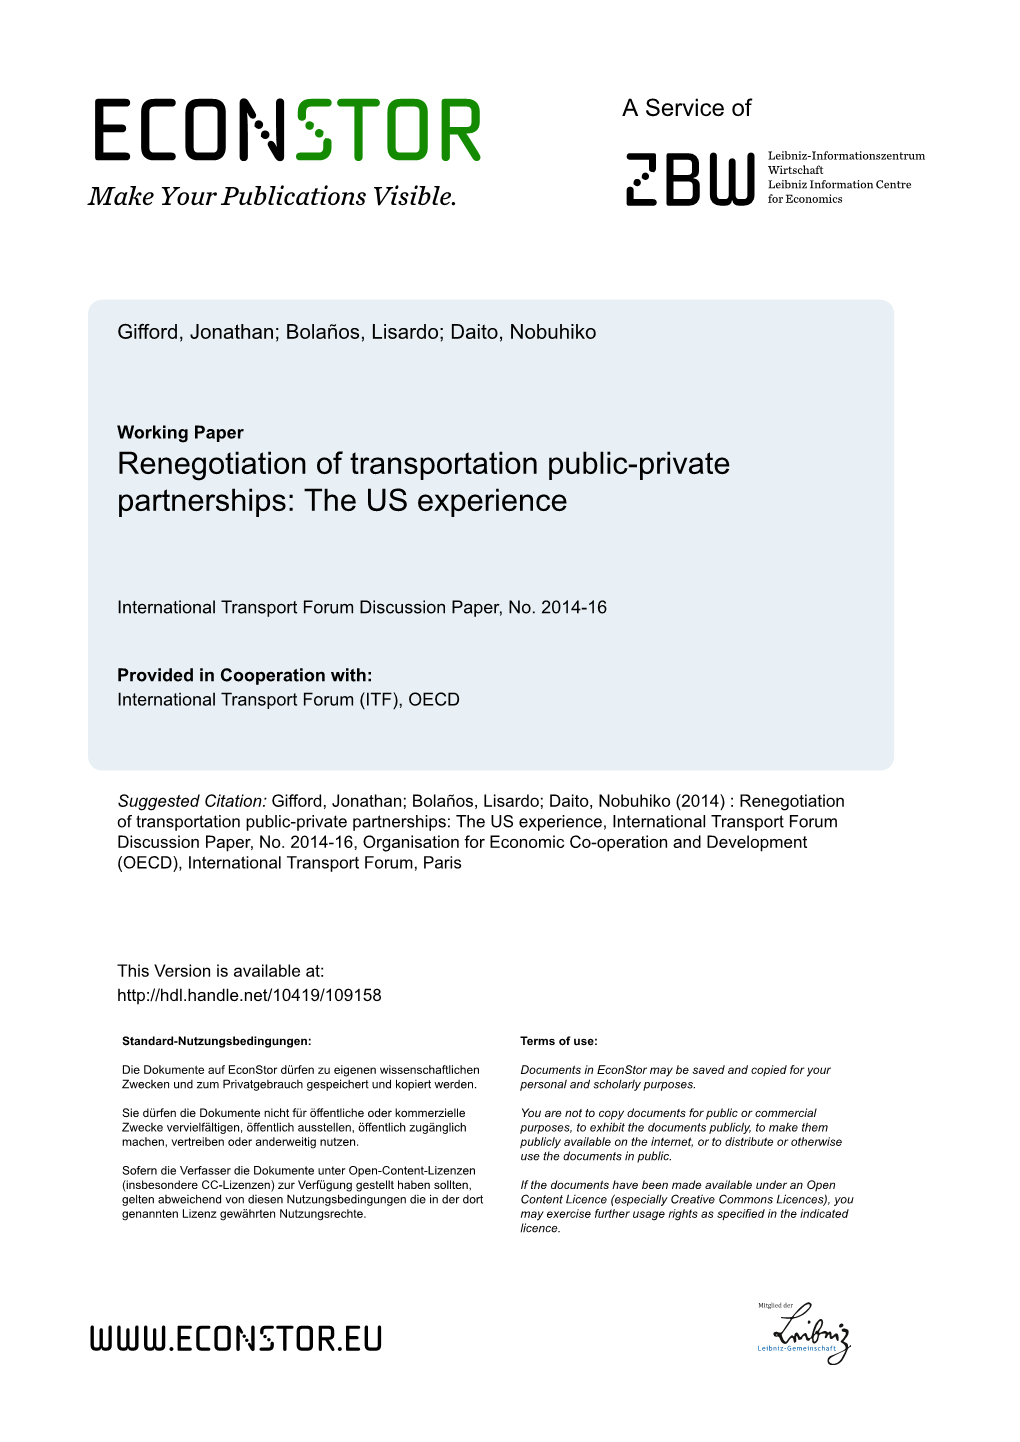 Renegotiation of Transportation Public-Private Partnerships: the US Experience